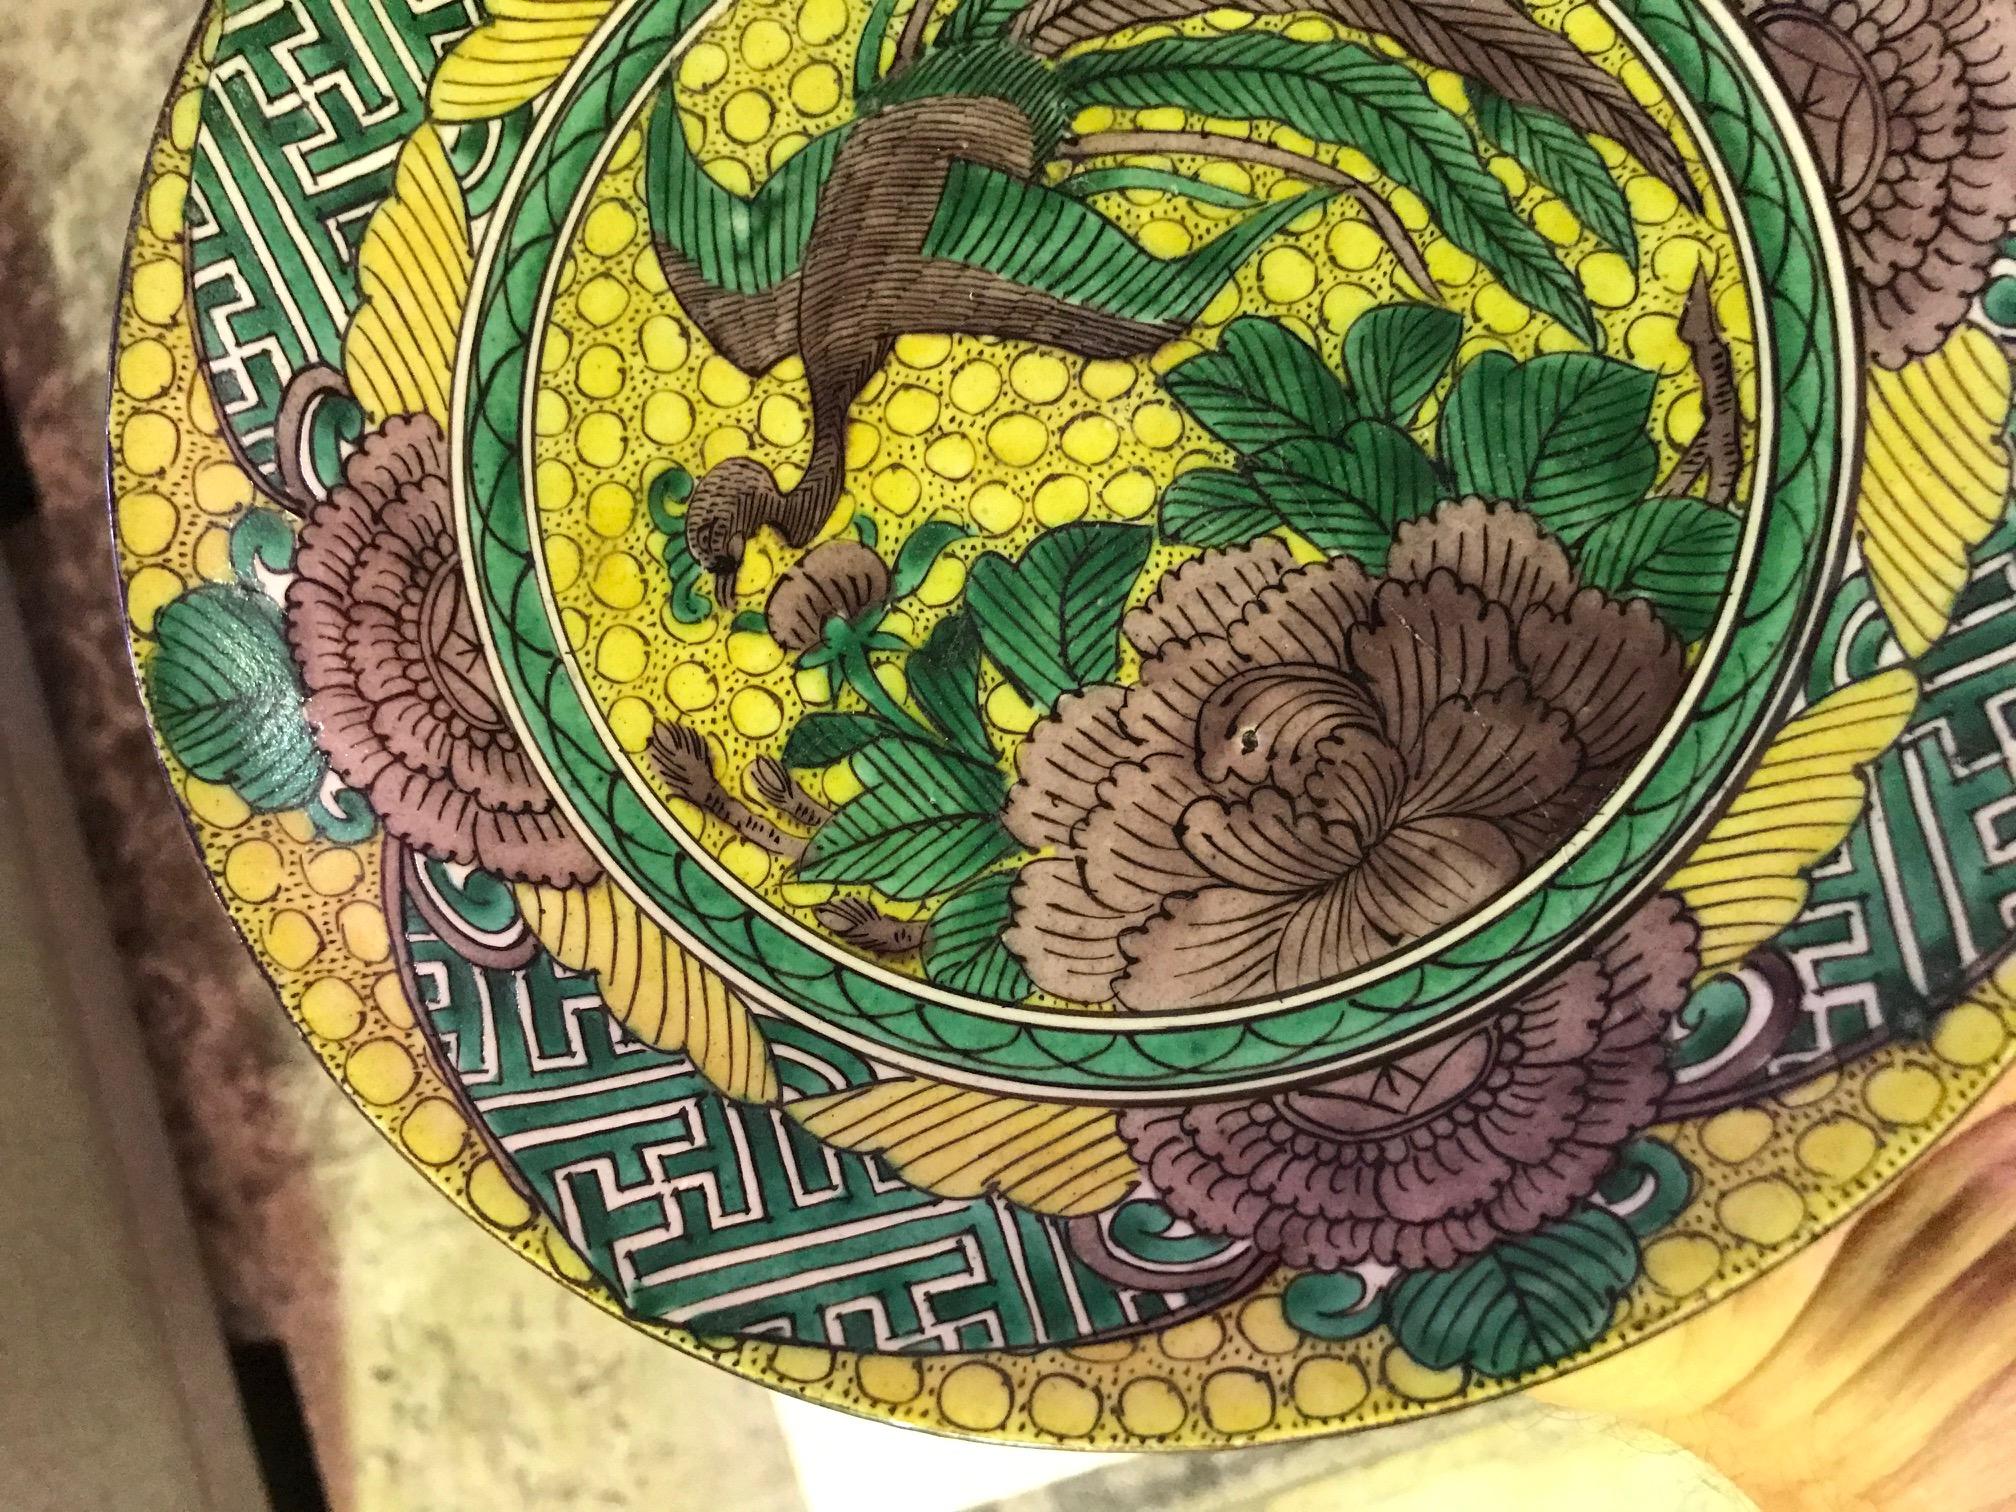 A wonderfully decorated, hand painted Japanese plate. 

From a collection of Japanese art, pottery, and artifacts.

Signed or stamped on the base.

Dimensions: 1.5